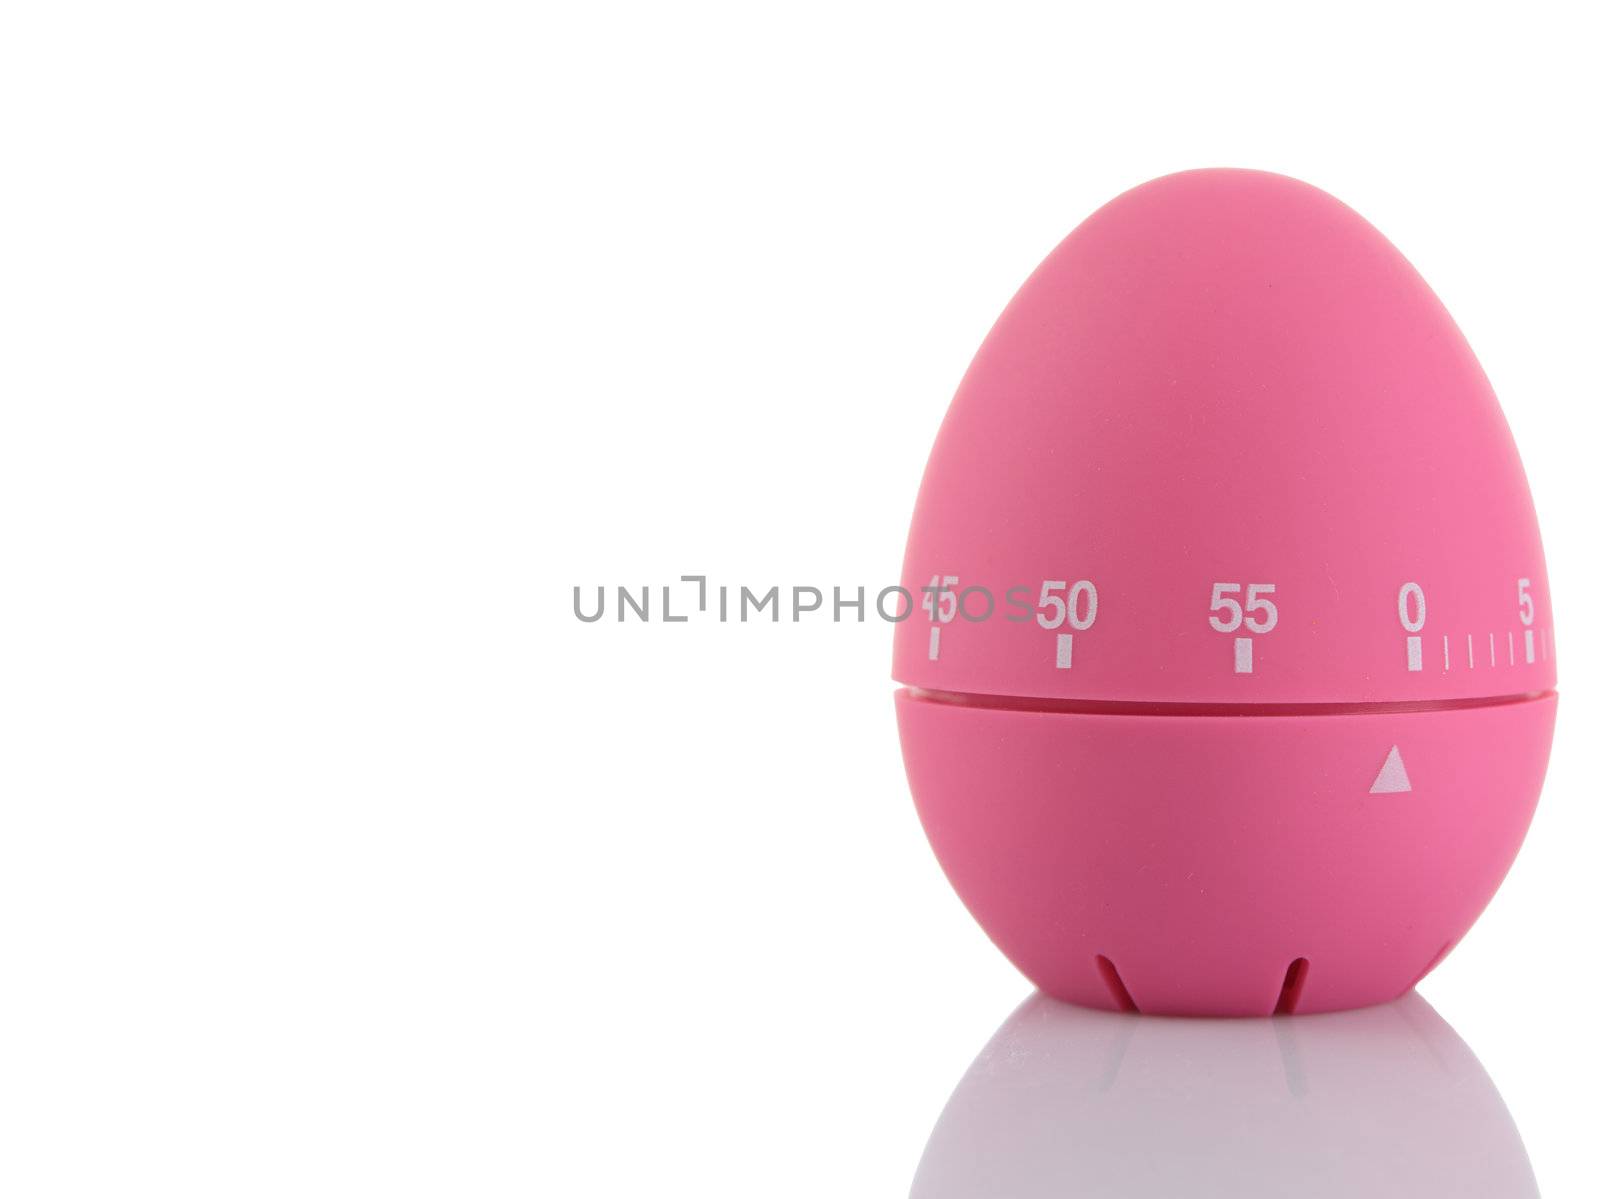 Pink egg timer isolated on white background